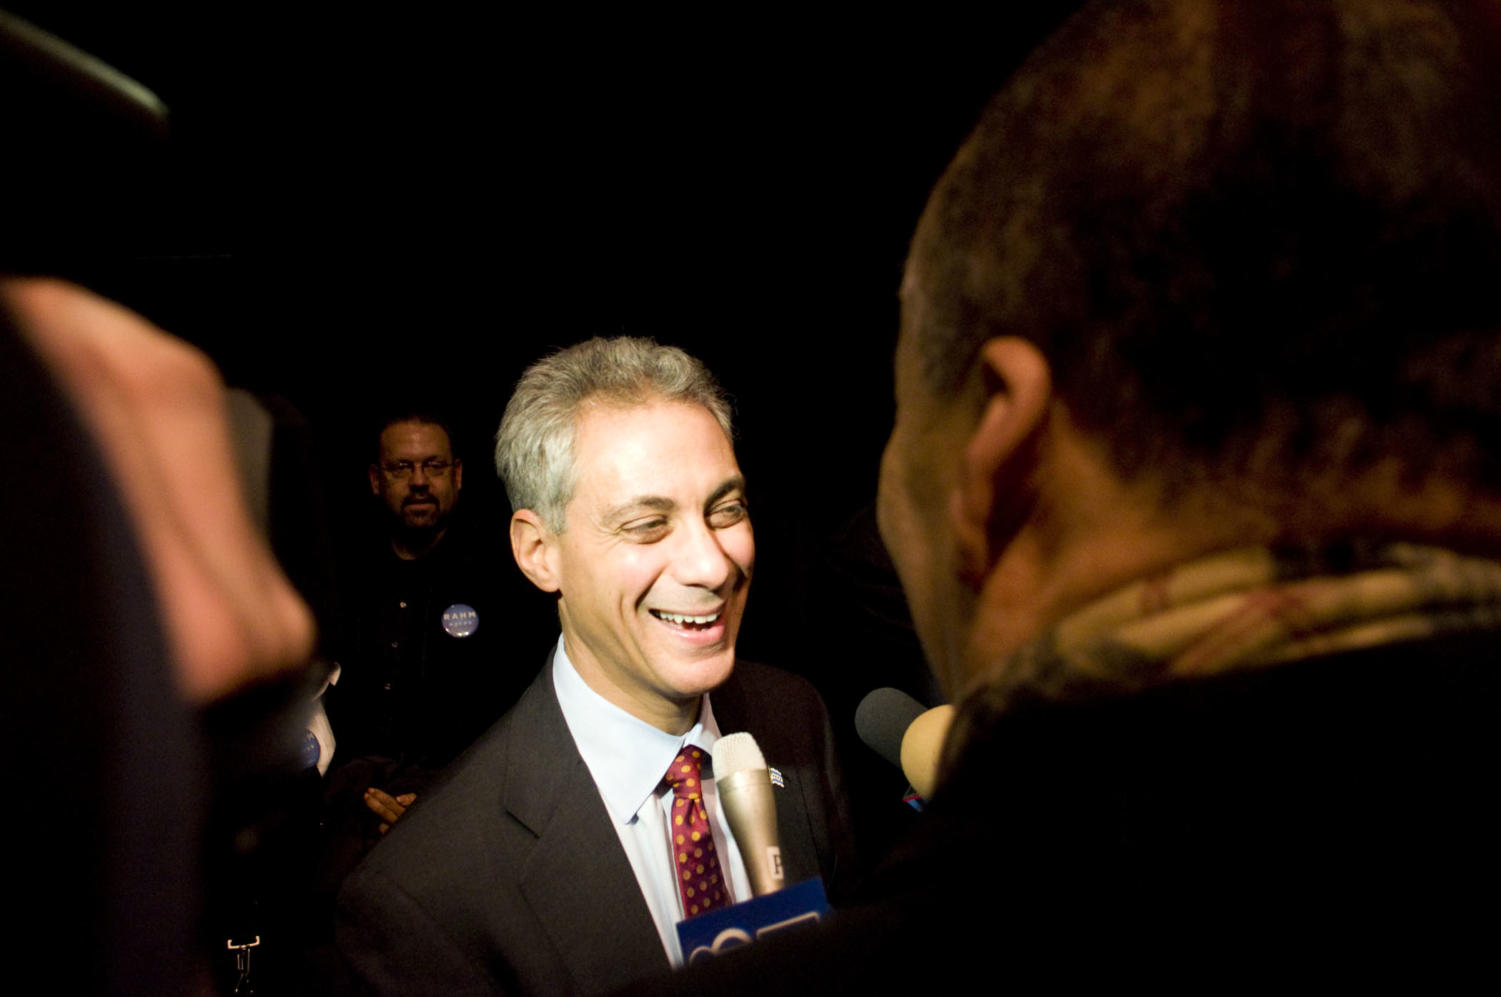 Rahm Emanuel is interviewed by ABC 7 News.